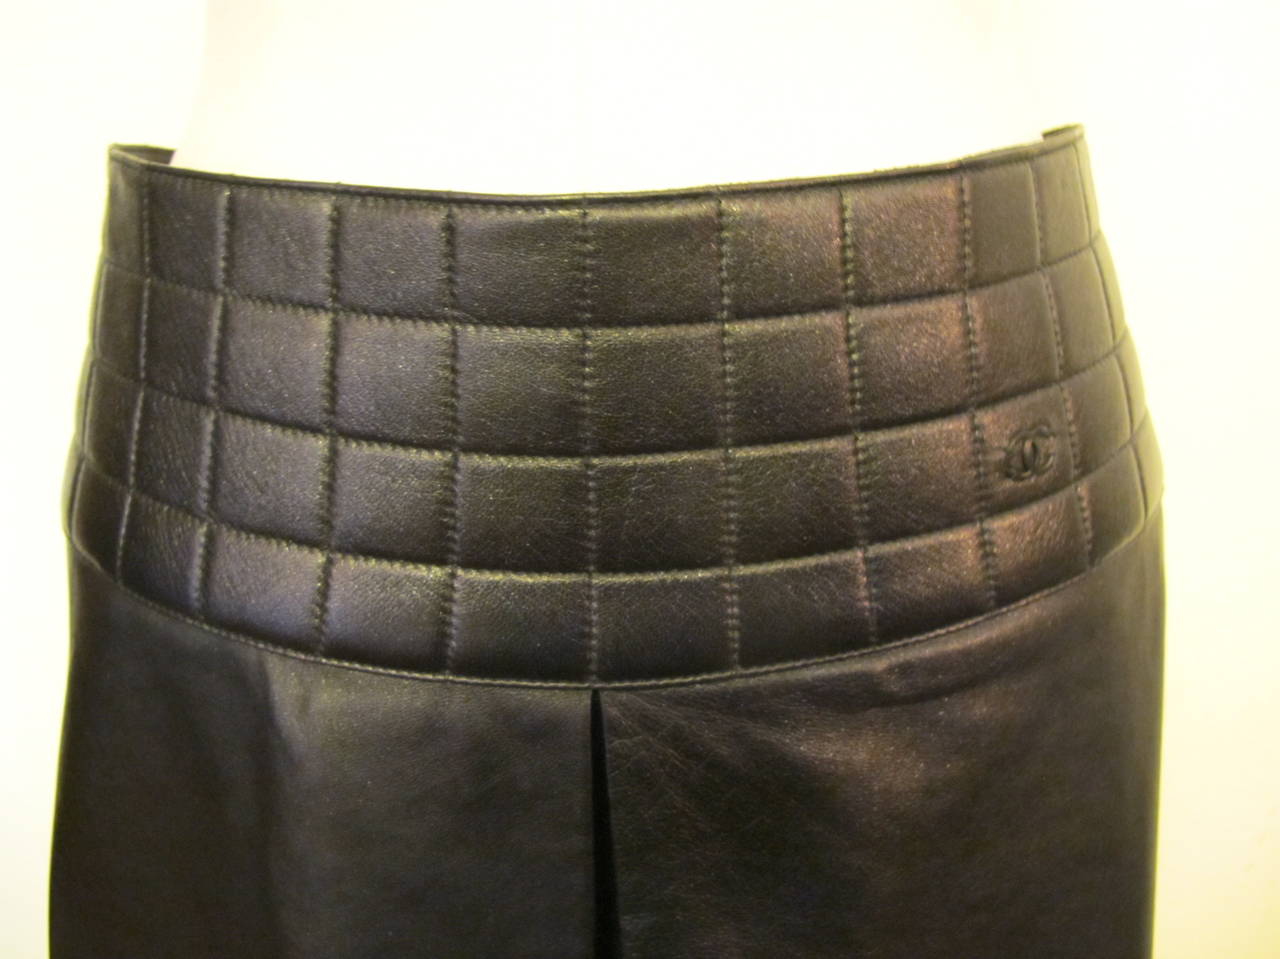 Chanel Hipster Lambskin Skirt with 4 inch Quilted Band In Excellent Condition For Sale In San Francisco, CA